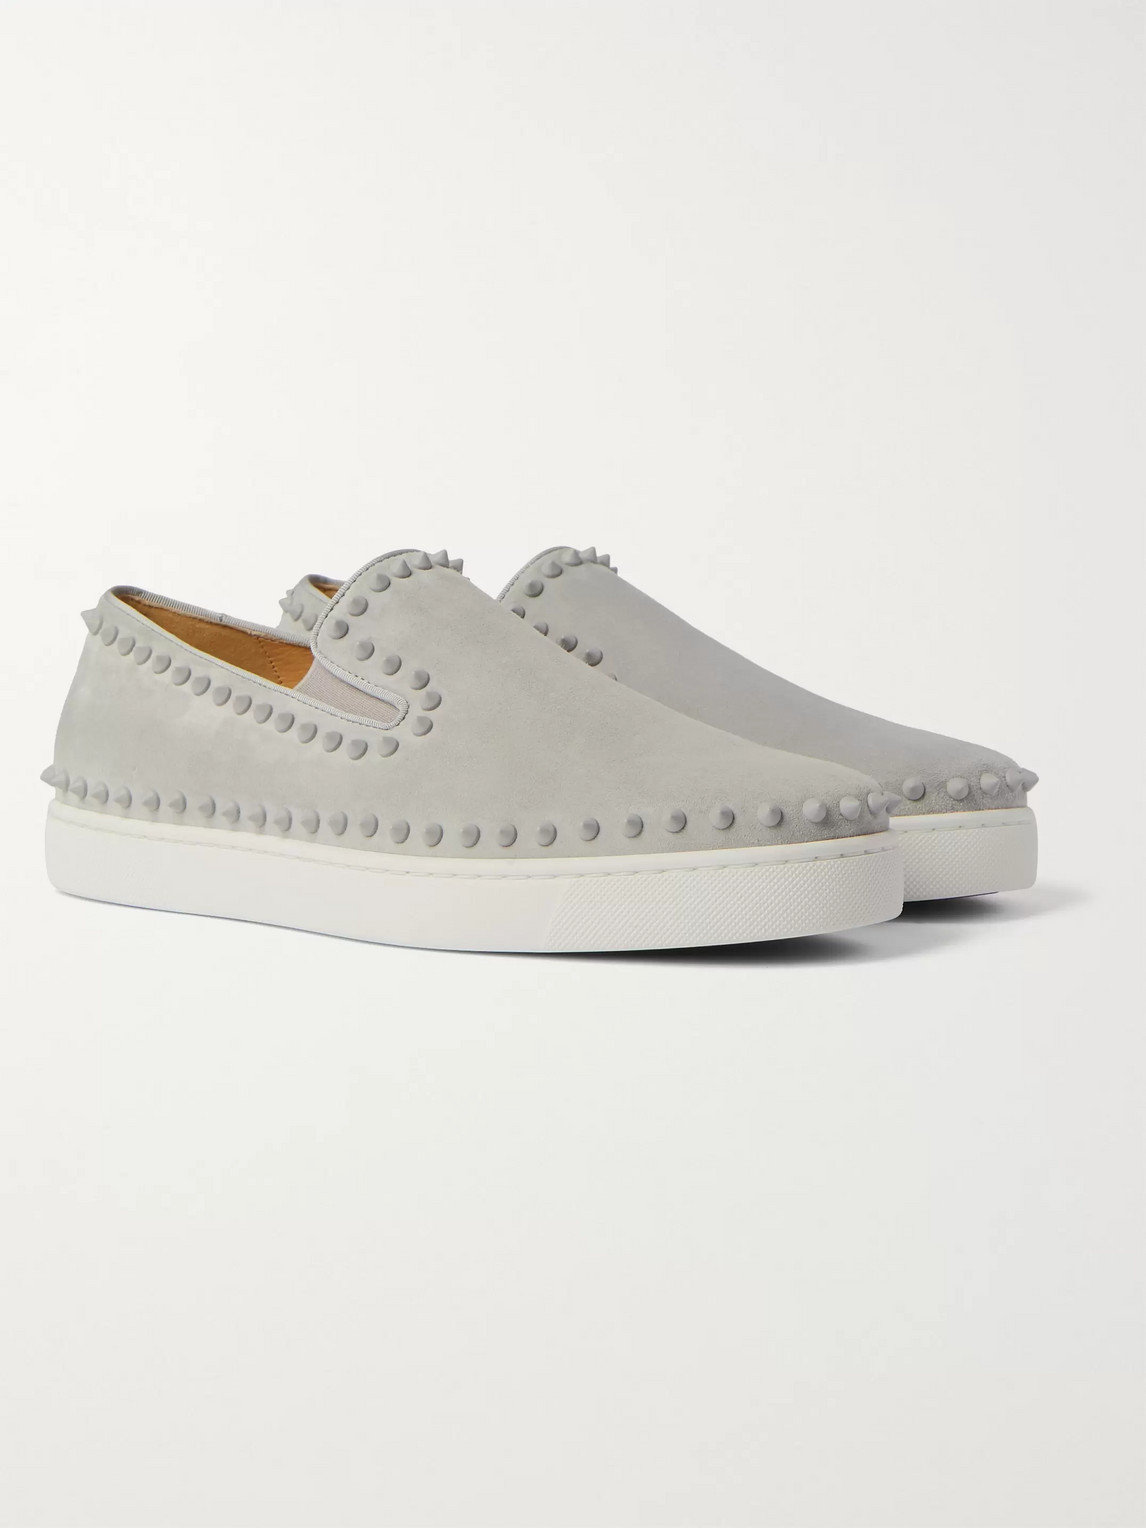 Christian Louboutin Pik Boat Studded Suede Slip-on Trainers In Grey